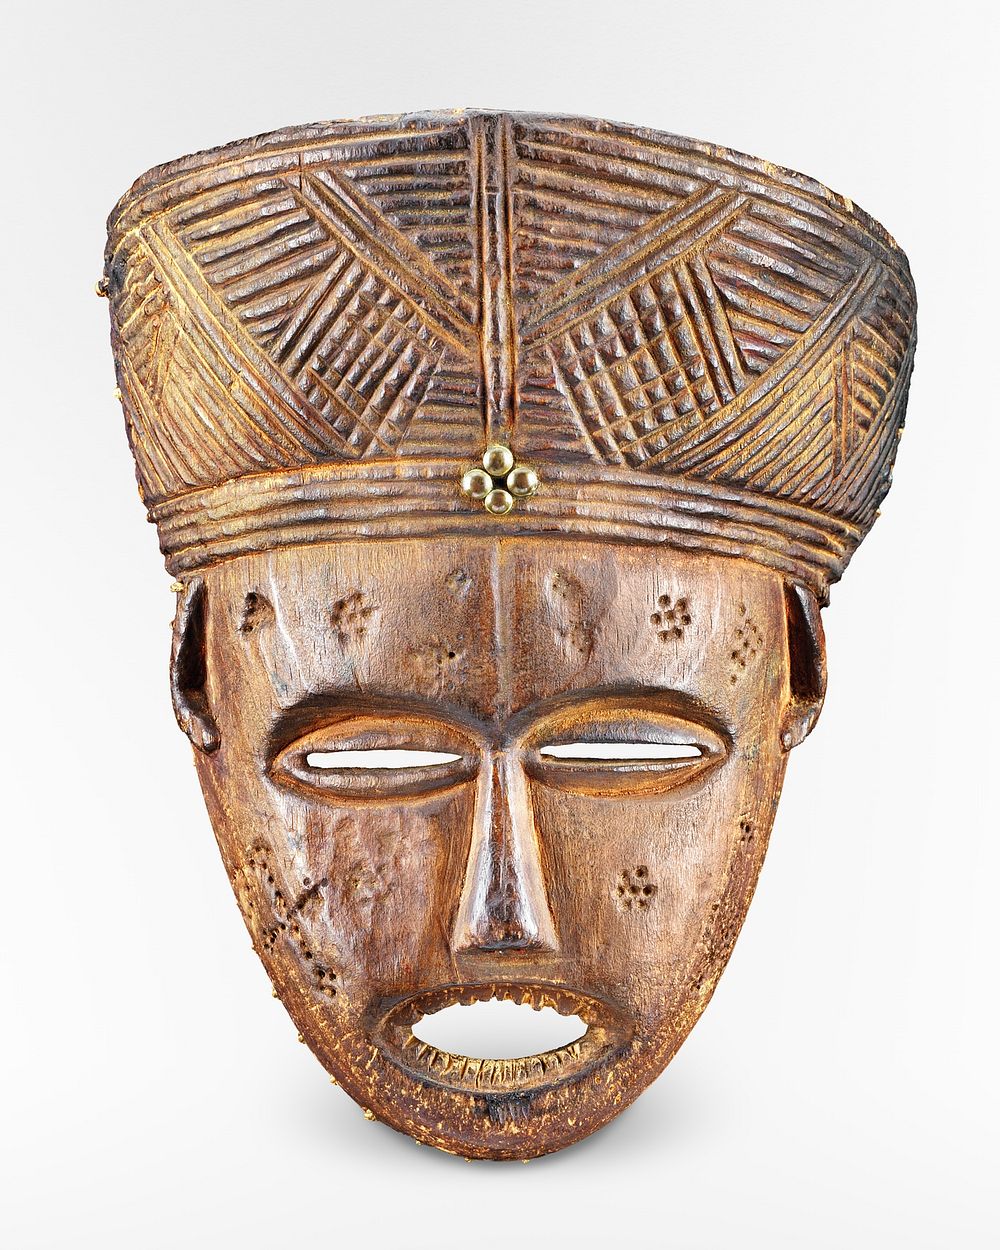 Wooden dance mask, Zaire, Tshokweized Lunda Cluster. Original from the Minneapolis Institute of Art.